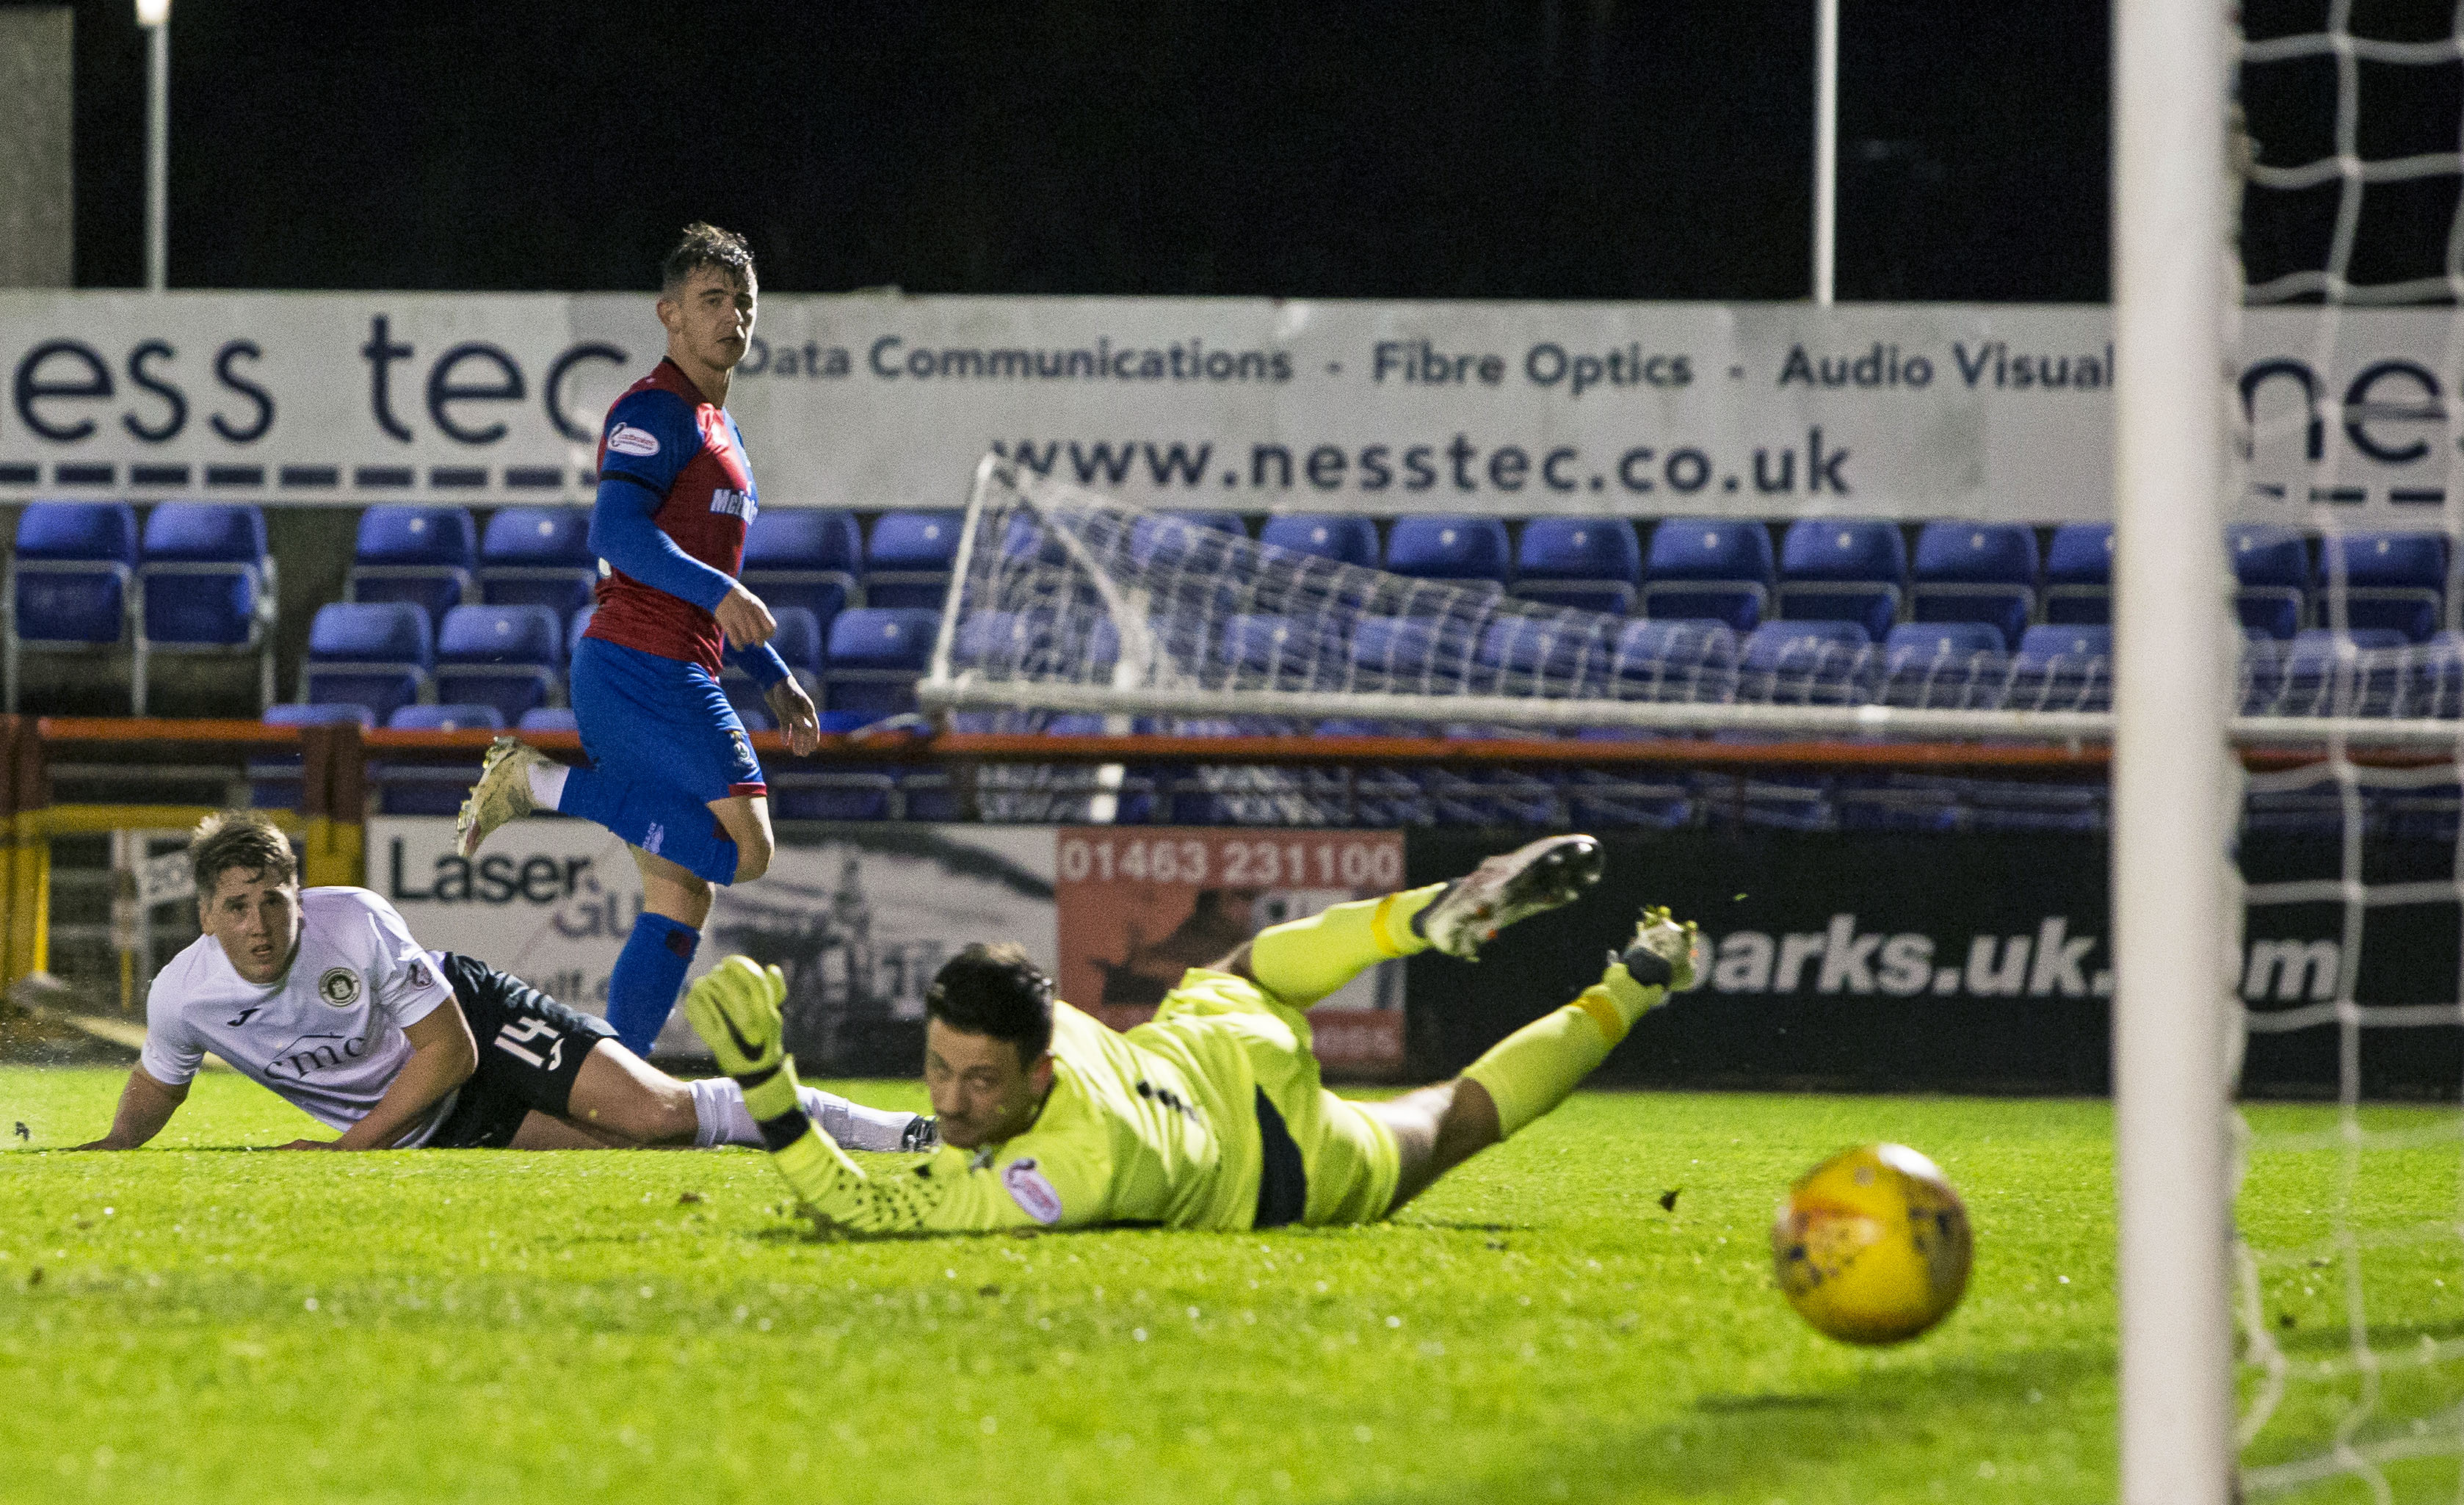 04/12/18 WILLIAM HILL SCOTTISH CUP 3RD ROUND REPLAY
INVERNESS CT v EDINBURGH CITY
TULLOCH CALEDONIAN STADIUM - INVERNESS
Inverness CT's Aaron Doran scores the 6th goal to make it 6-1